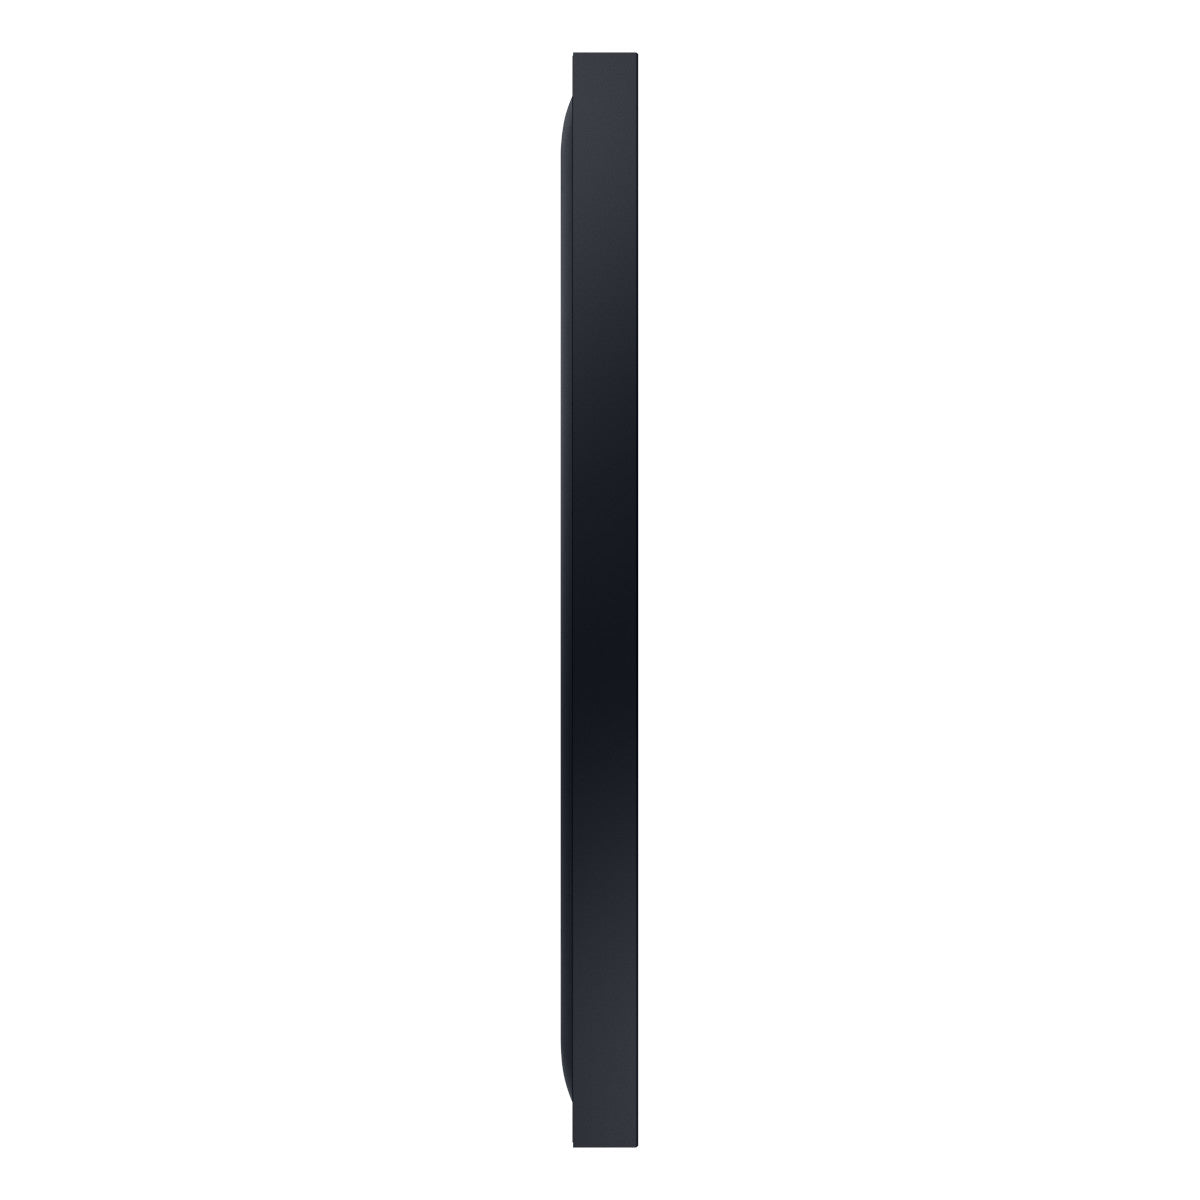 Samsung QN65LST7TA 65" The Terrace QLED 4K UHD Outdoor Smart TV with HW-LST70T The Terrace Sound Bar